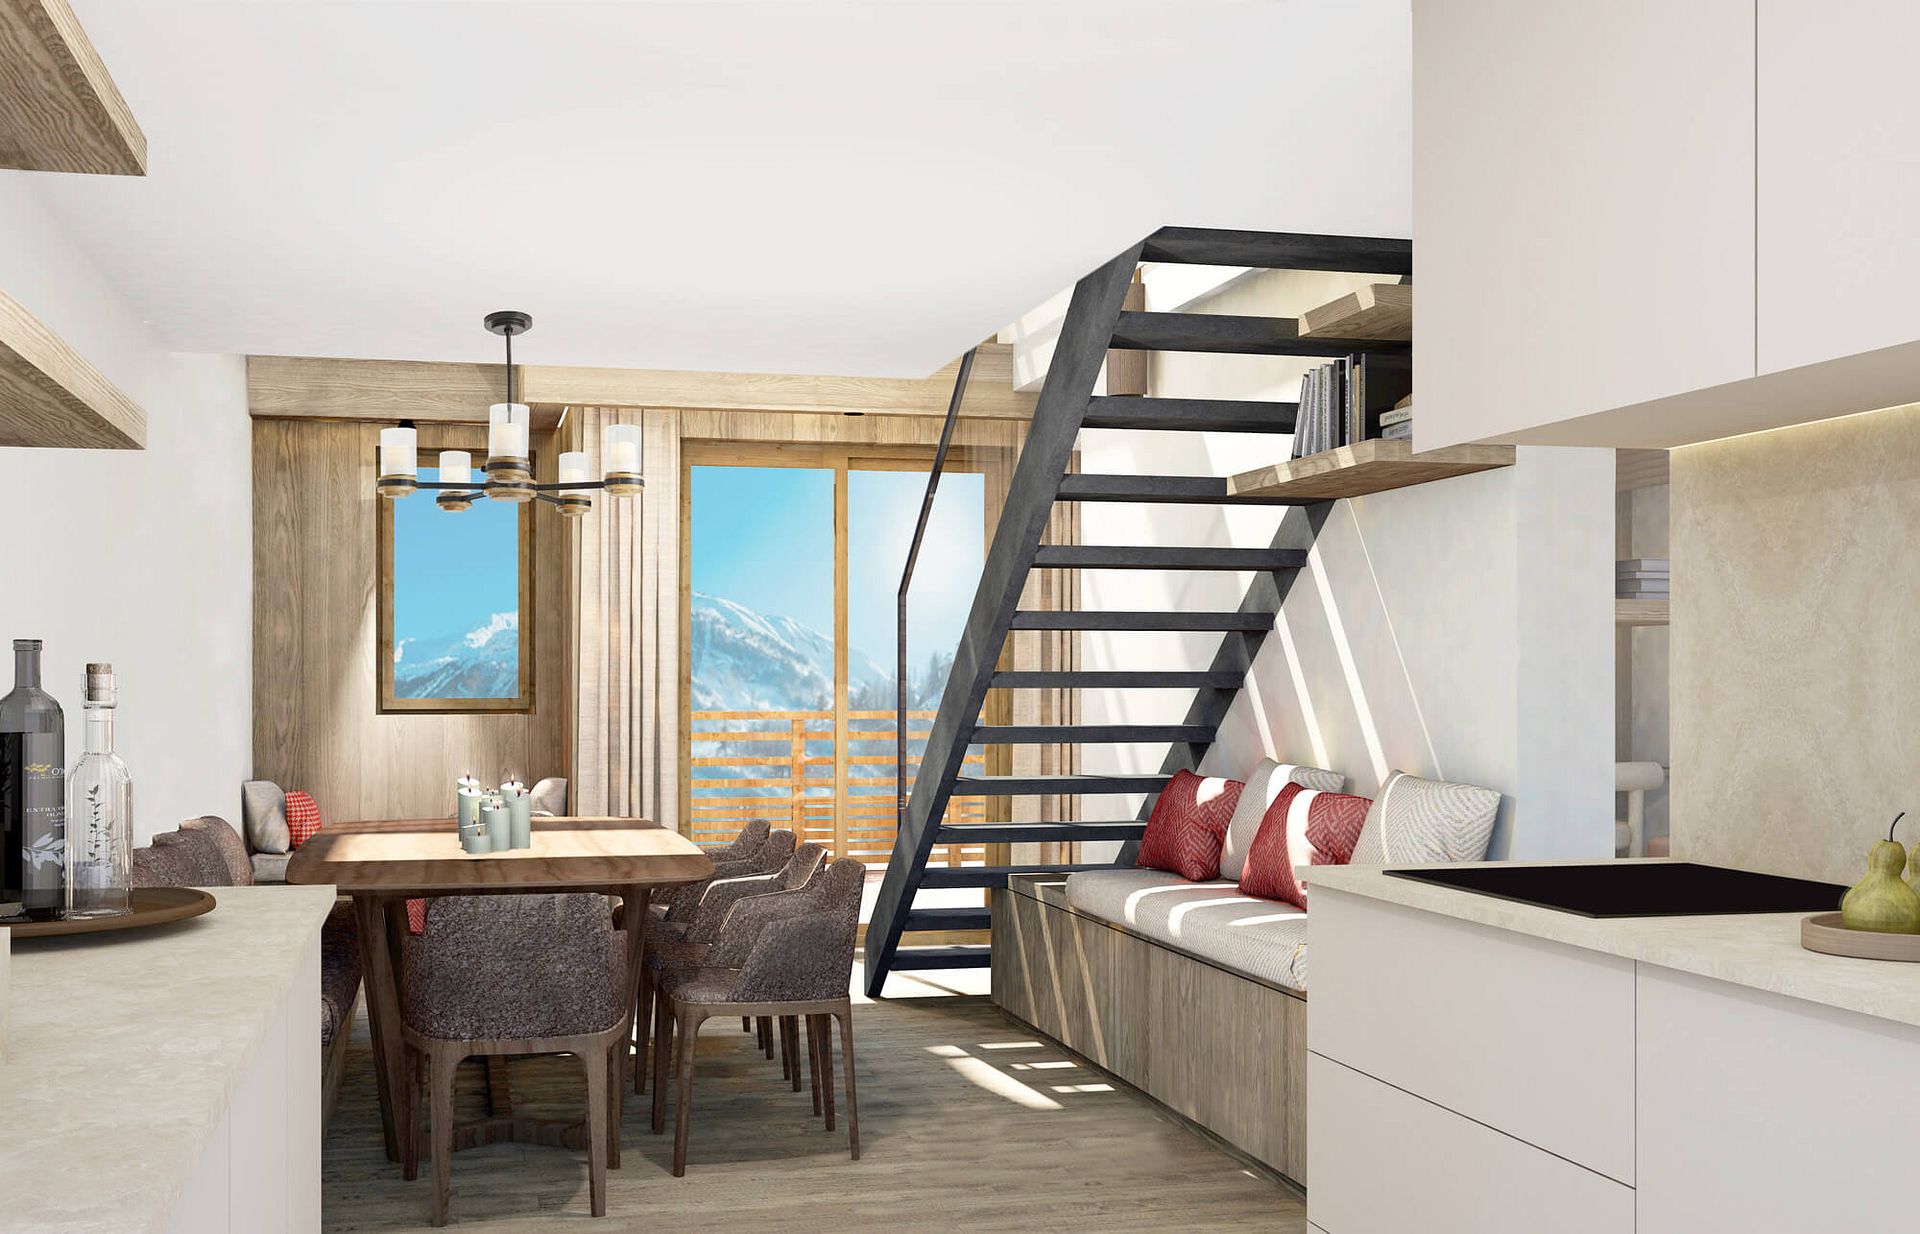 3 bed Apartment For Sale in Espace Killy, French Alps